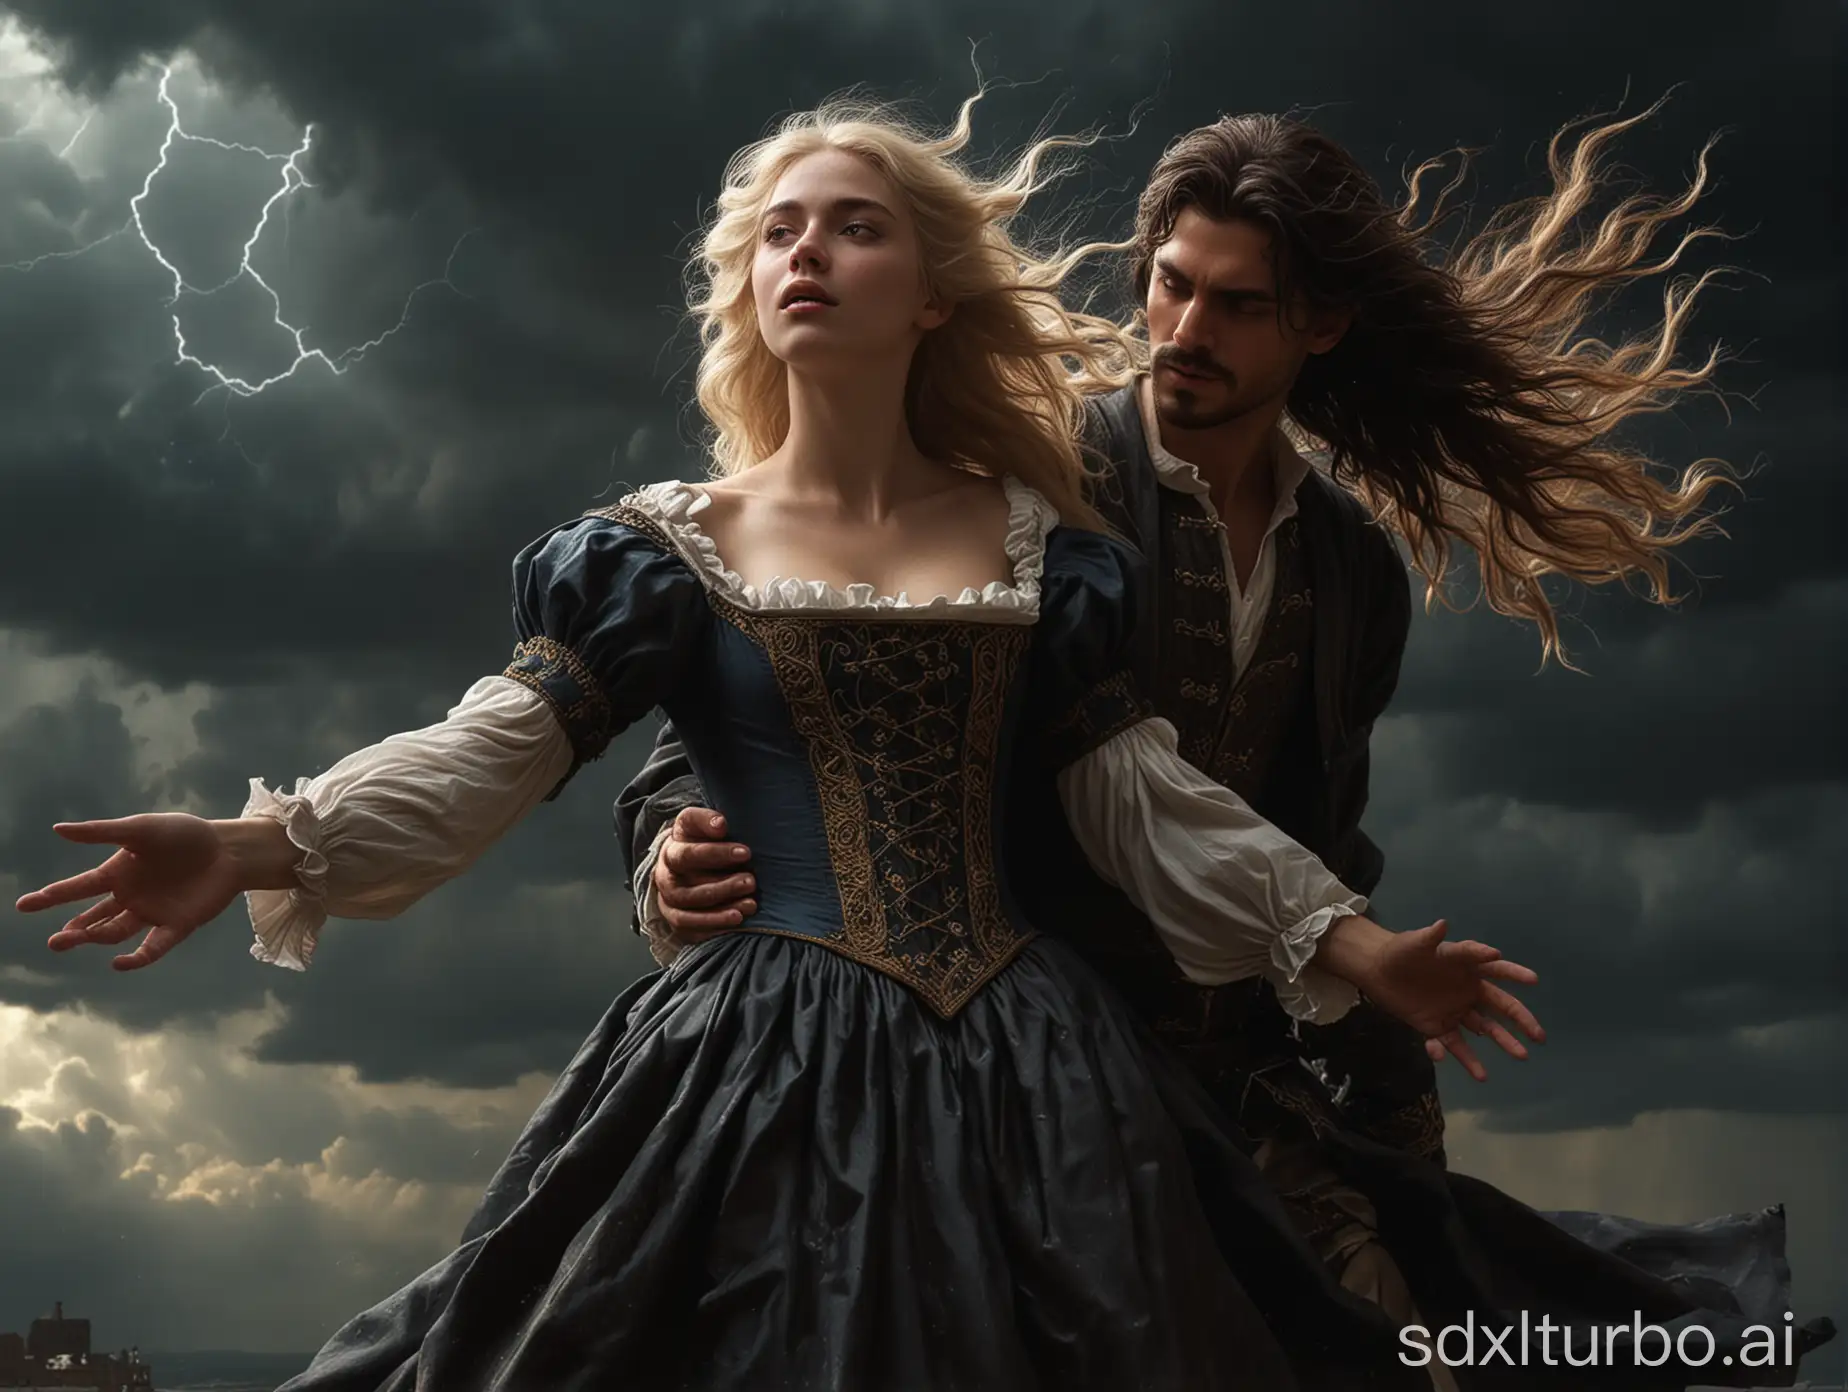 Young-Blonde-Woman-in-Medieval-Dress-Falling-into-the-Arms-of-a-Handsome-Guy-During-a-Thunderstorm